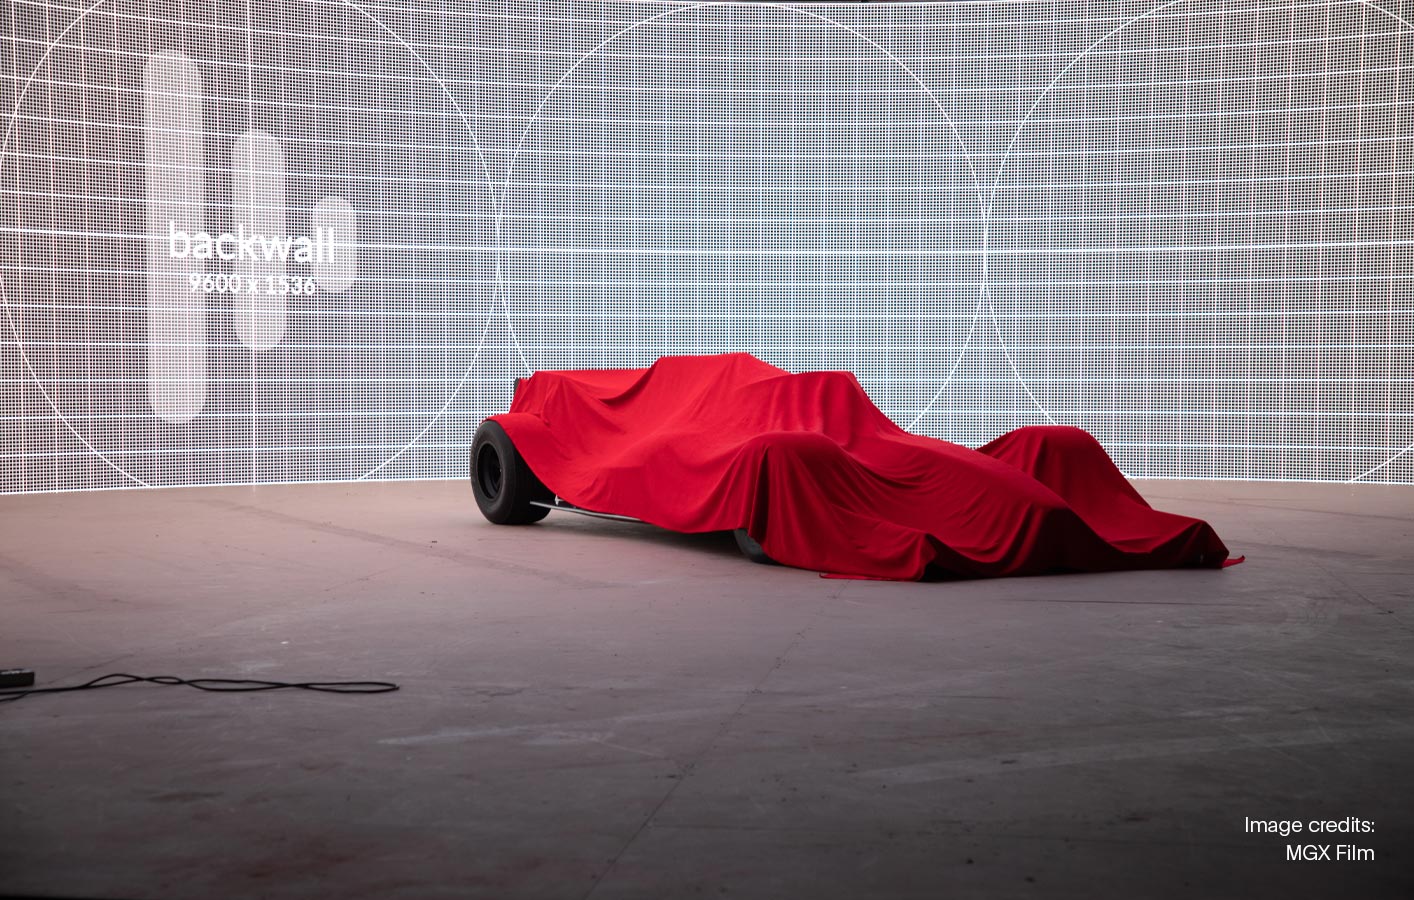 MGX Studio uses disguise to drive a virtual production commercial with Formula 1 and Autonomy